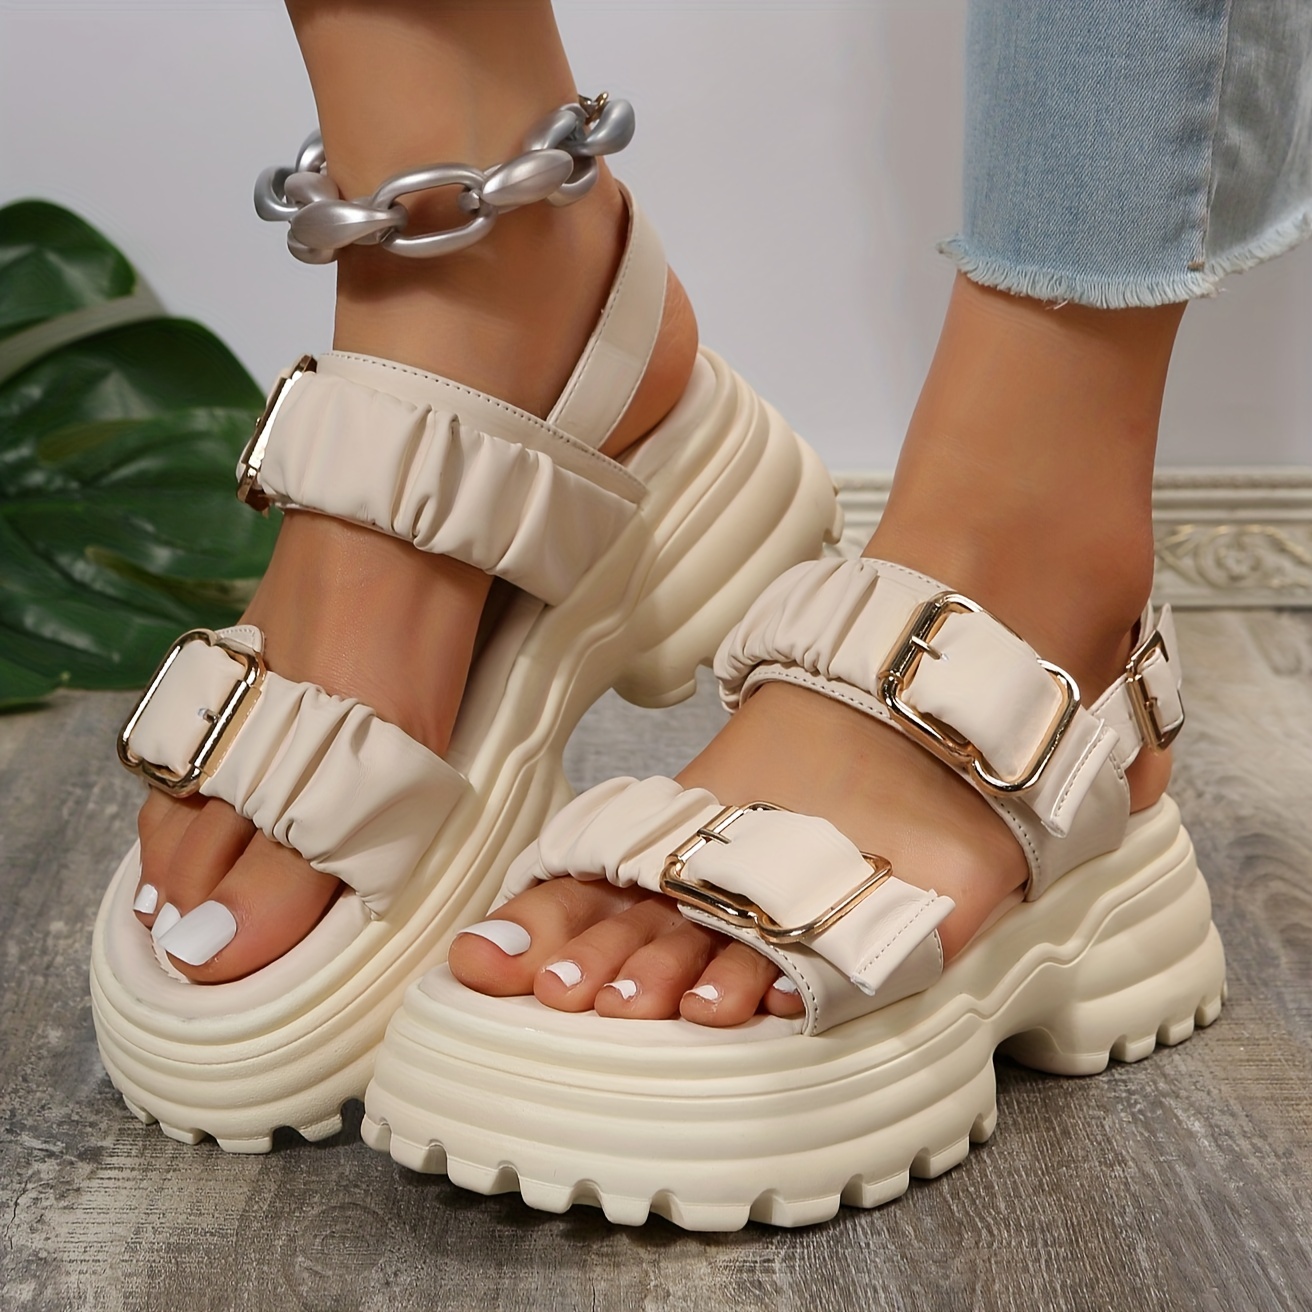 

Women's Pleated Design Platform Sandals, Casual Buckle Strap Summer Shoes, Comfortable Chunky Heel Sandals